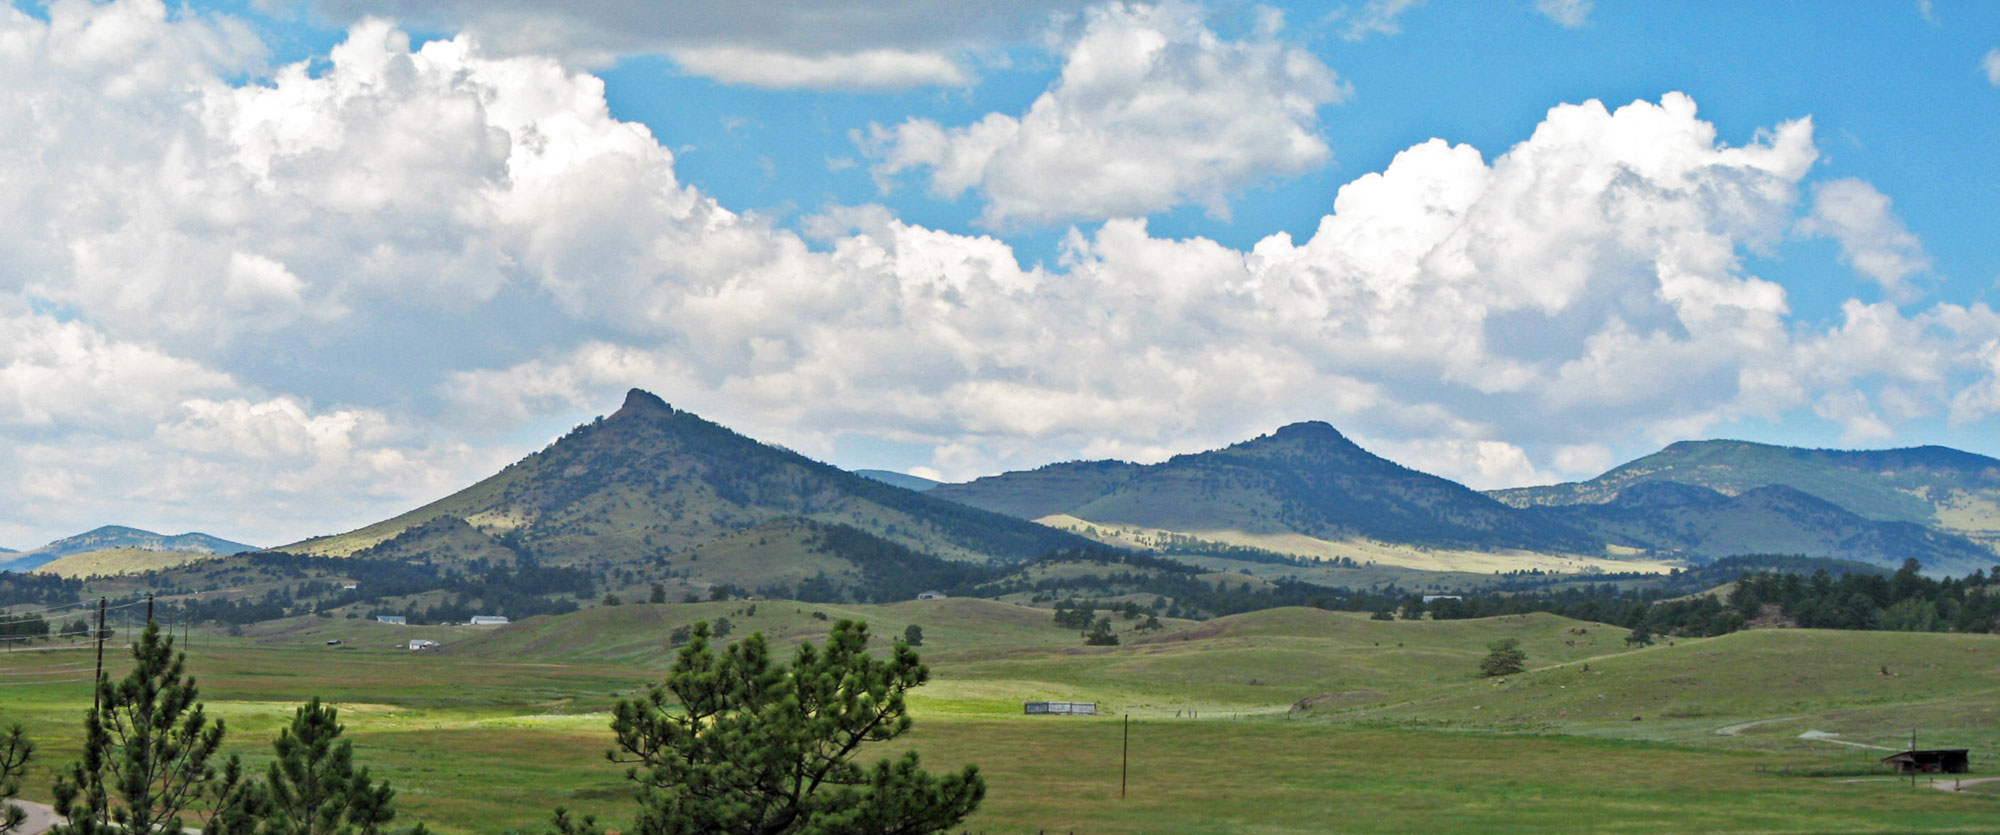 Photograph of the Guffey Volcanic Center volcanoes in Colorado. The photo shows a landscape with a green field in the foreground. Behind it are rolling hills, then taller volcanic peaks. Two of the most prominent peaks are cone-shaped.